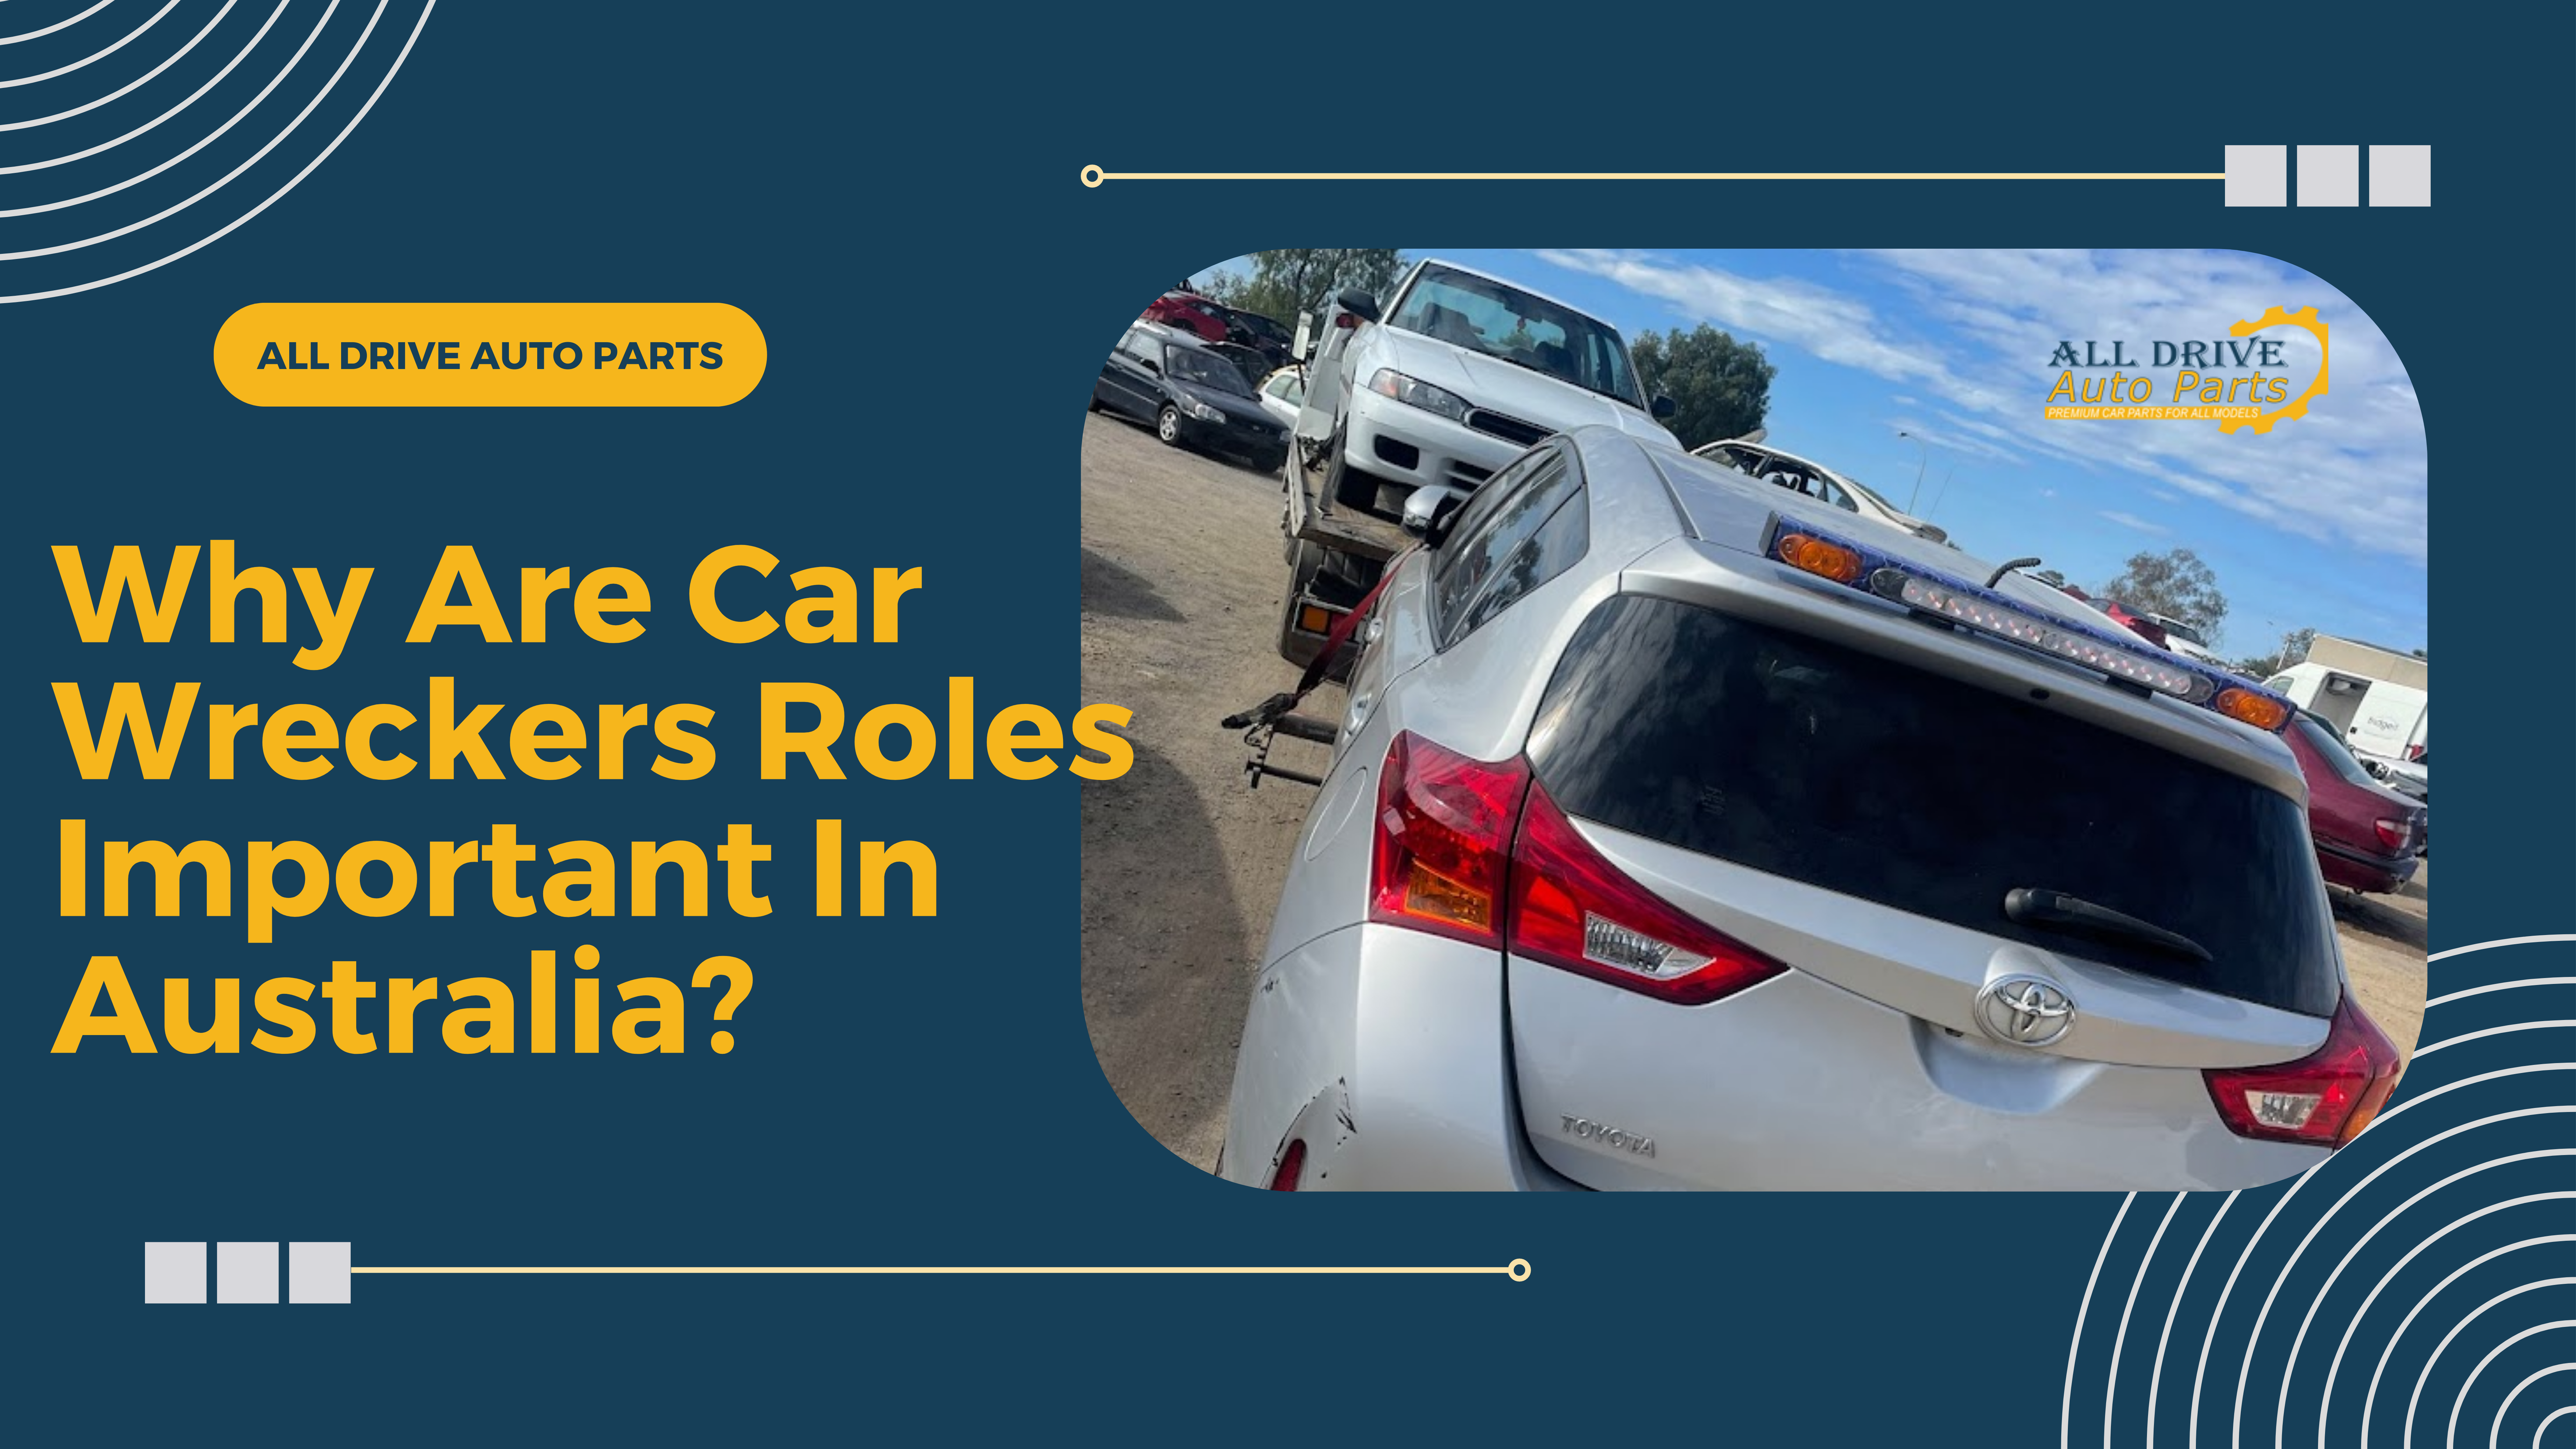 Why Are Car Wreckers Roles Important In Australia